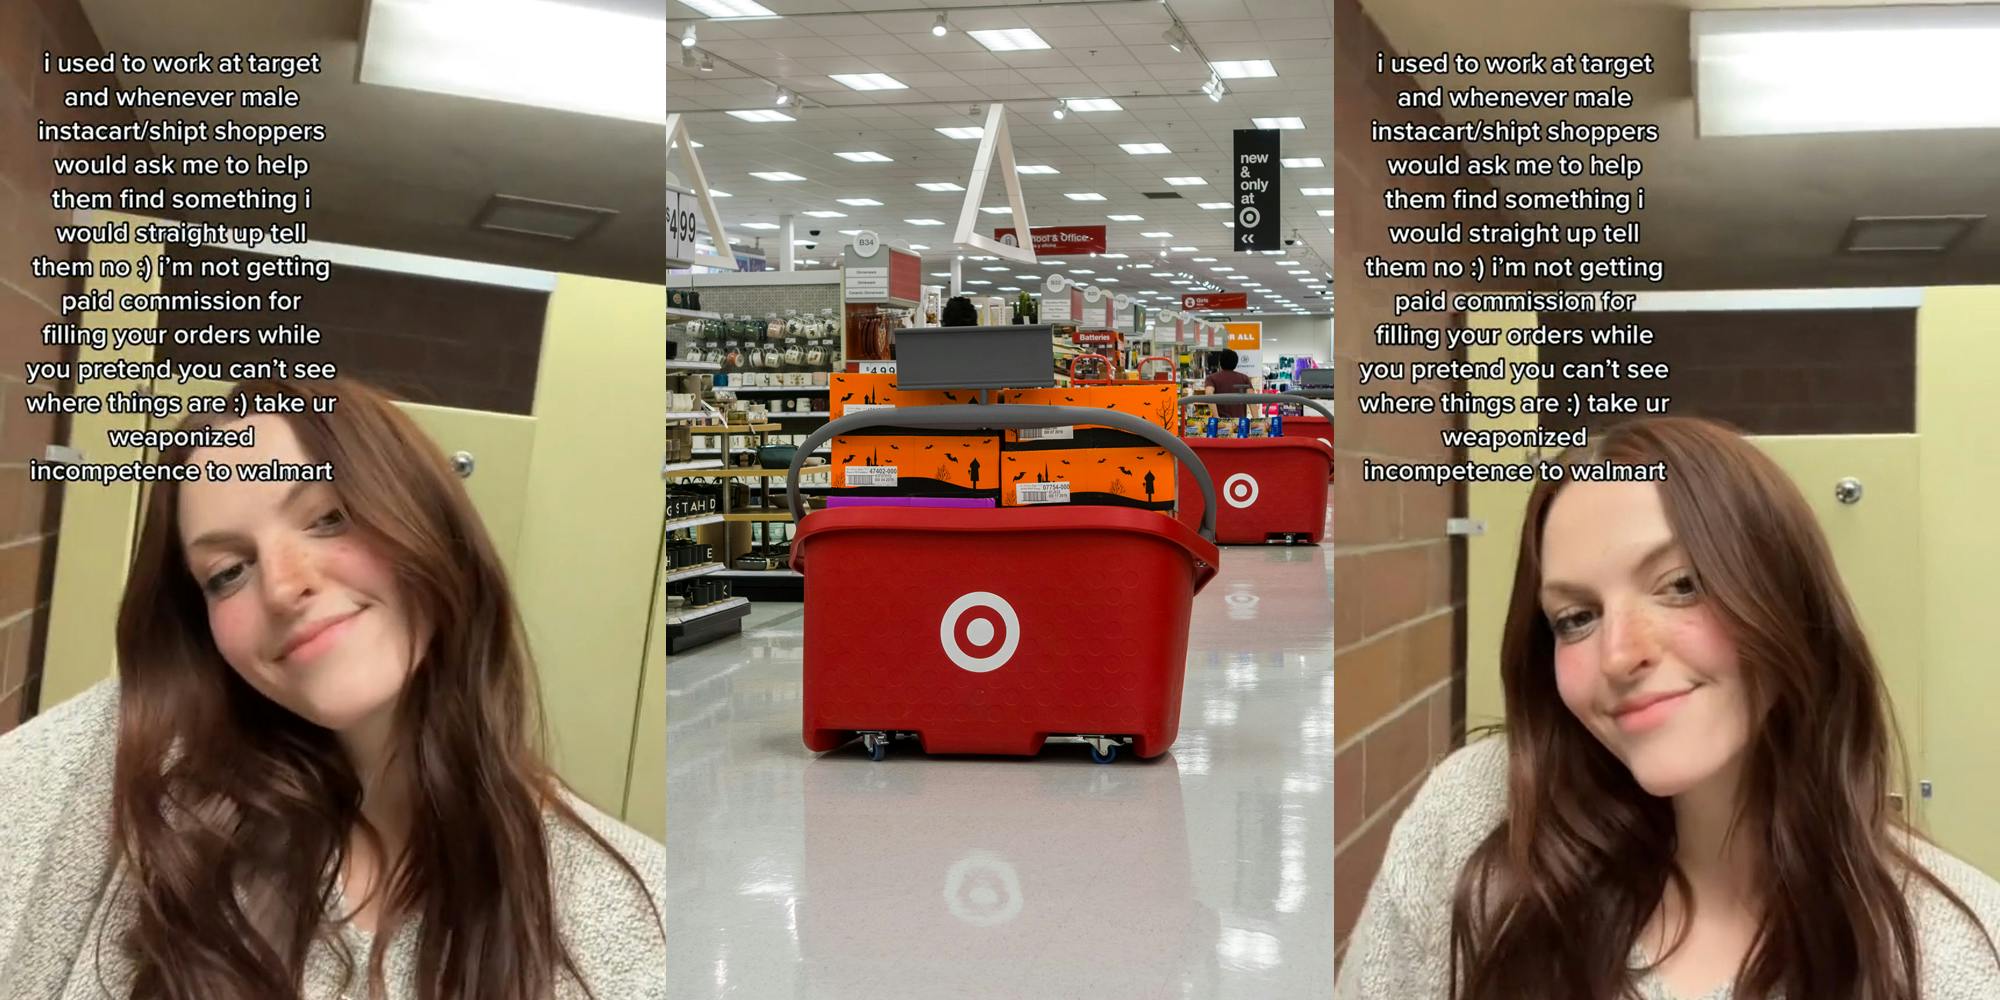 former Target employee in bathroom with caption "i used to work at target and whenever male instacart/shipt shoppers would ask me to help them find something i would straight up tell them no :) i'm not getting paid commission for your orders while you pretend you can't see where things are: ) take your weaponized incompetence to walmart" (l) Target aisles with Target logo on center decor (c) former Target employee in bathroom with caption "i used to work at target and whenever male instacart/shipt shoppers would ask me to help them find something i would straight up tell them no :) i'm not getting paid commission for your orders while you pretend you can't see where things are: ) take your weaponized incompetence to walmart" (r)